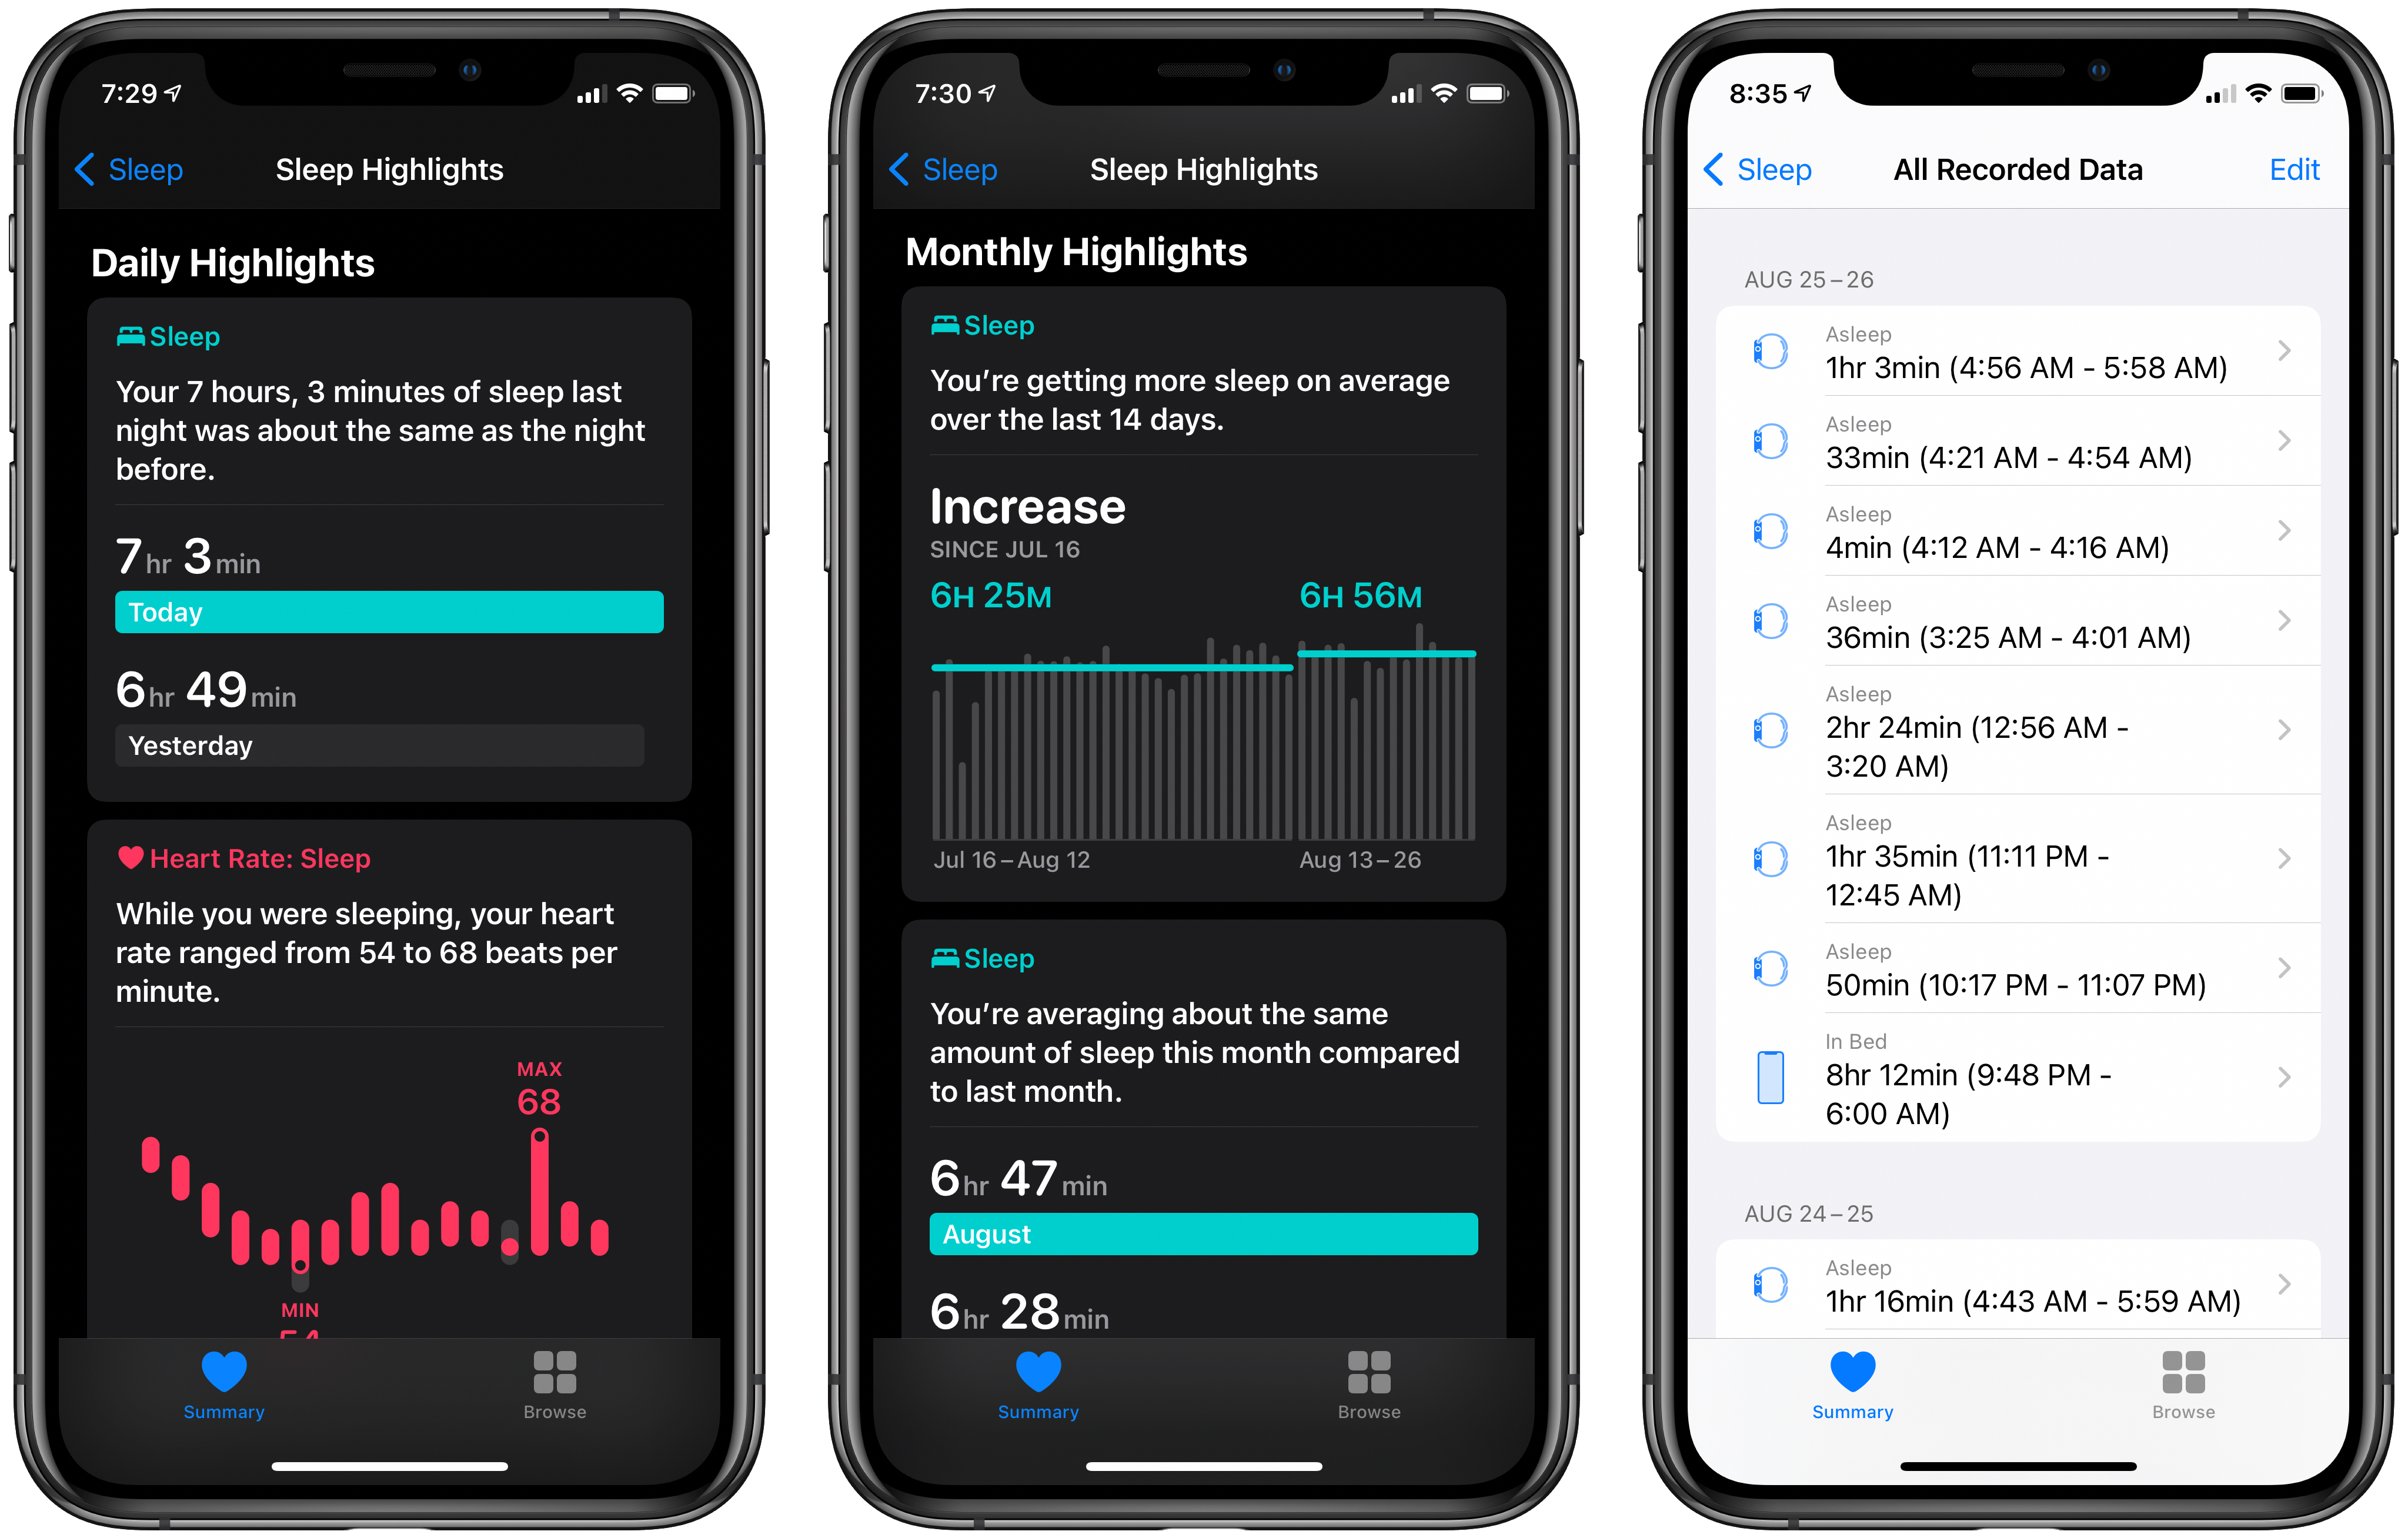 Sleep highlights (left and center) and viewing all data (right).